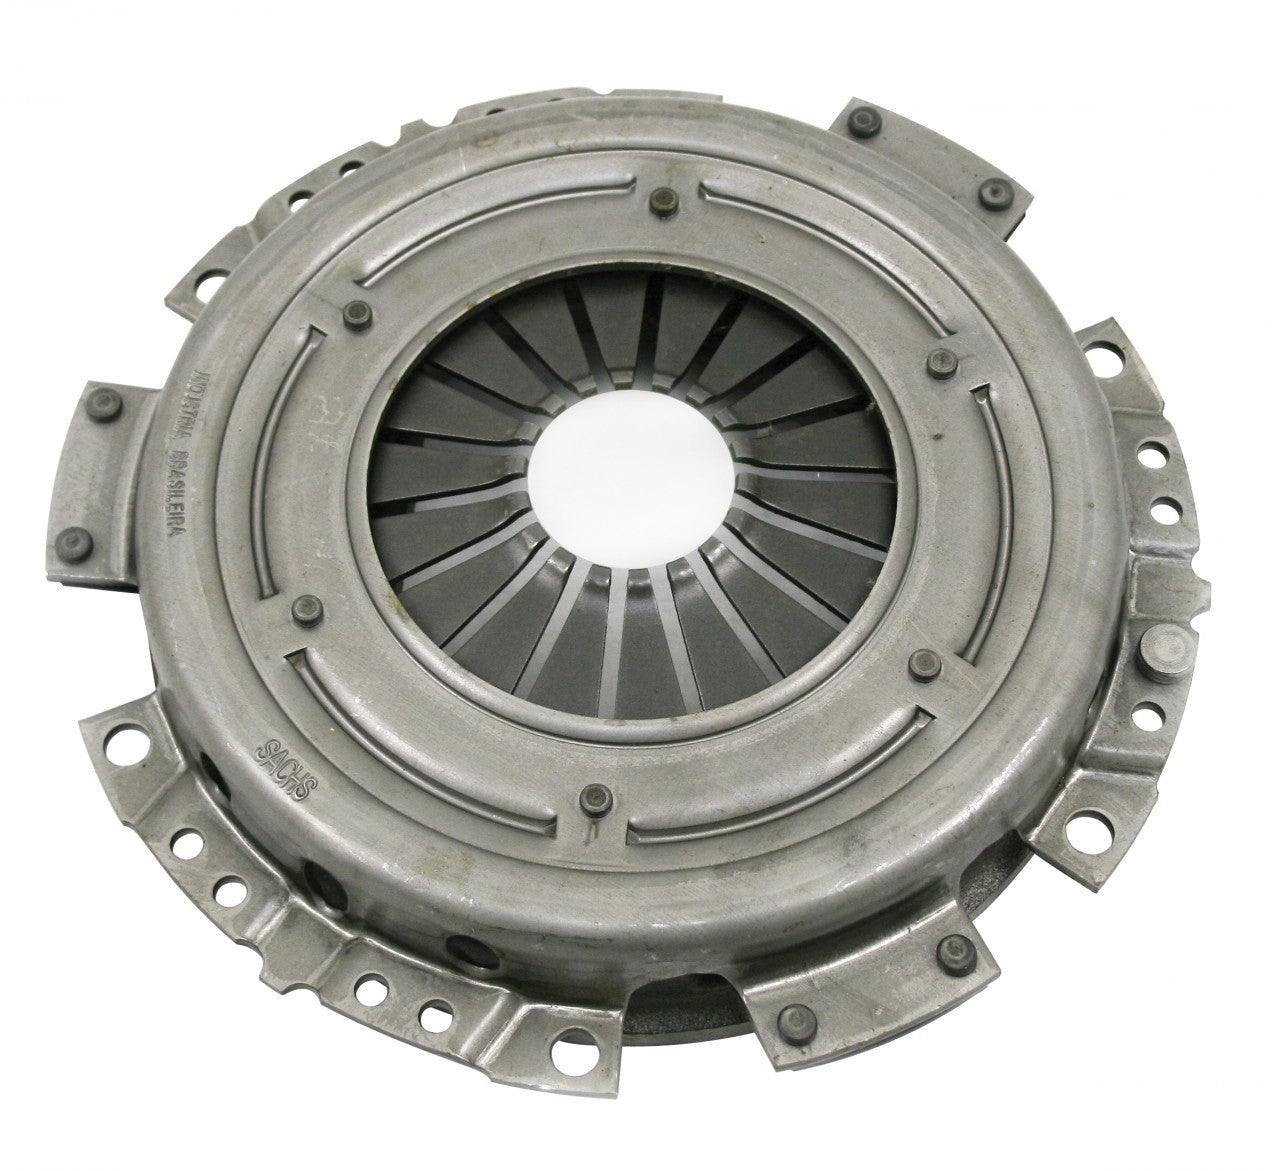 SACHS PRESSURE PLATE 200MM, 71 ON